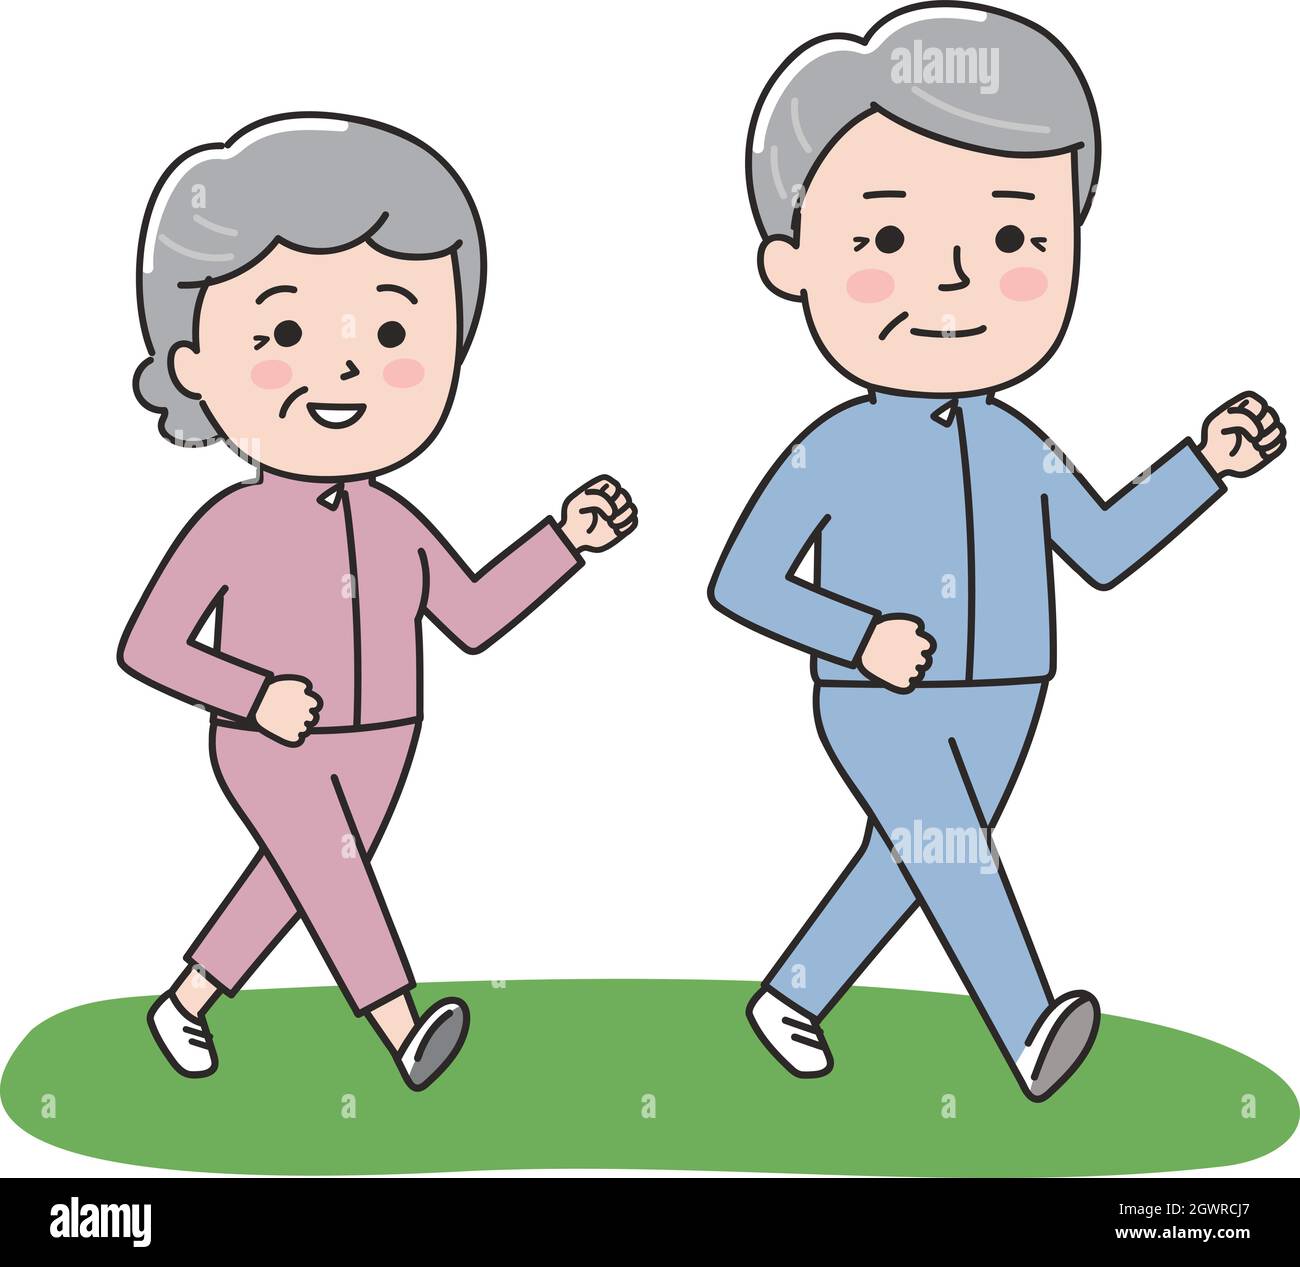 The elderly couple diet to lose weight by walking. Vector illustration on a white background. Stock Vector